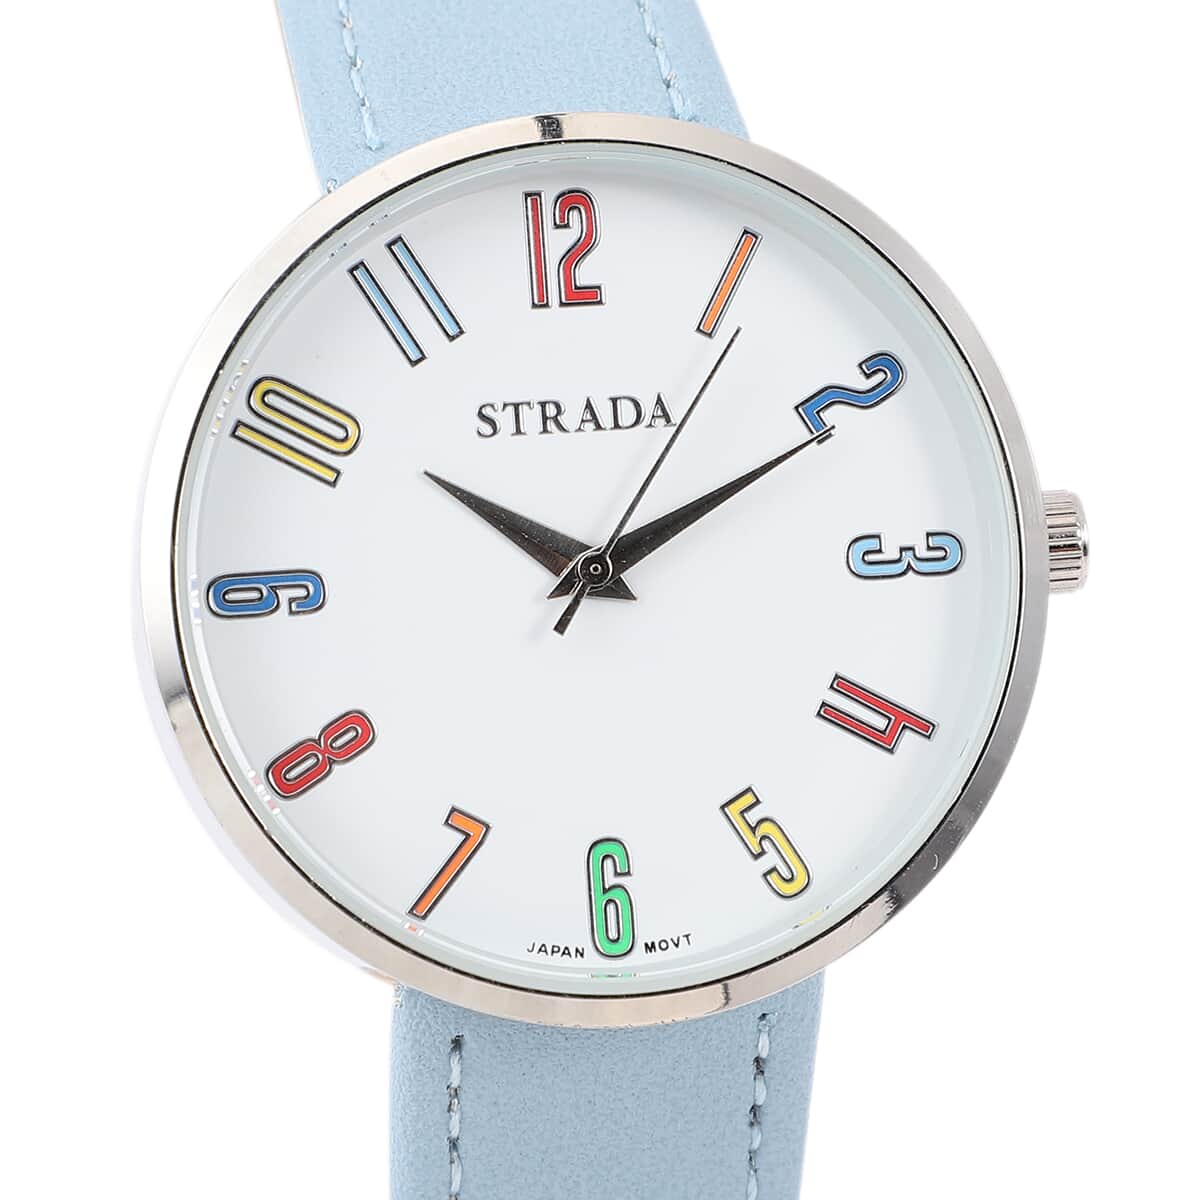 Strada Japanese Movement Water Resistant Watch with Blue Faux Leather Band image number 2